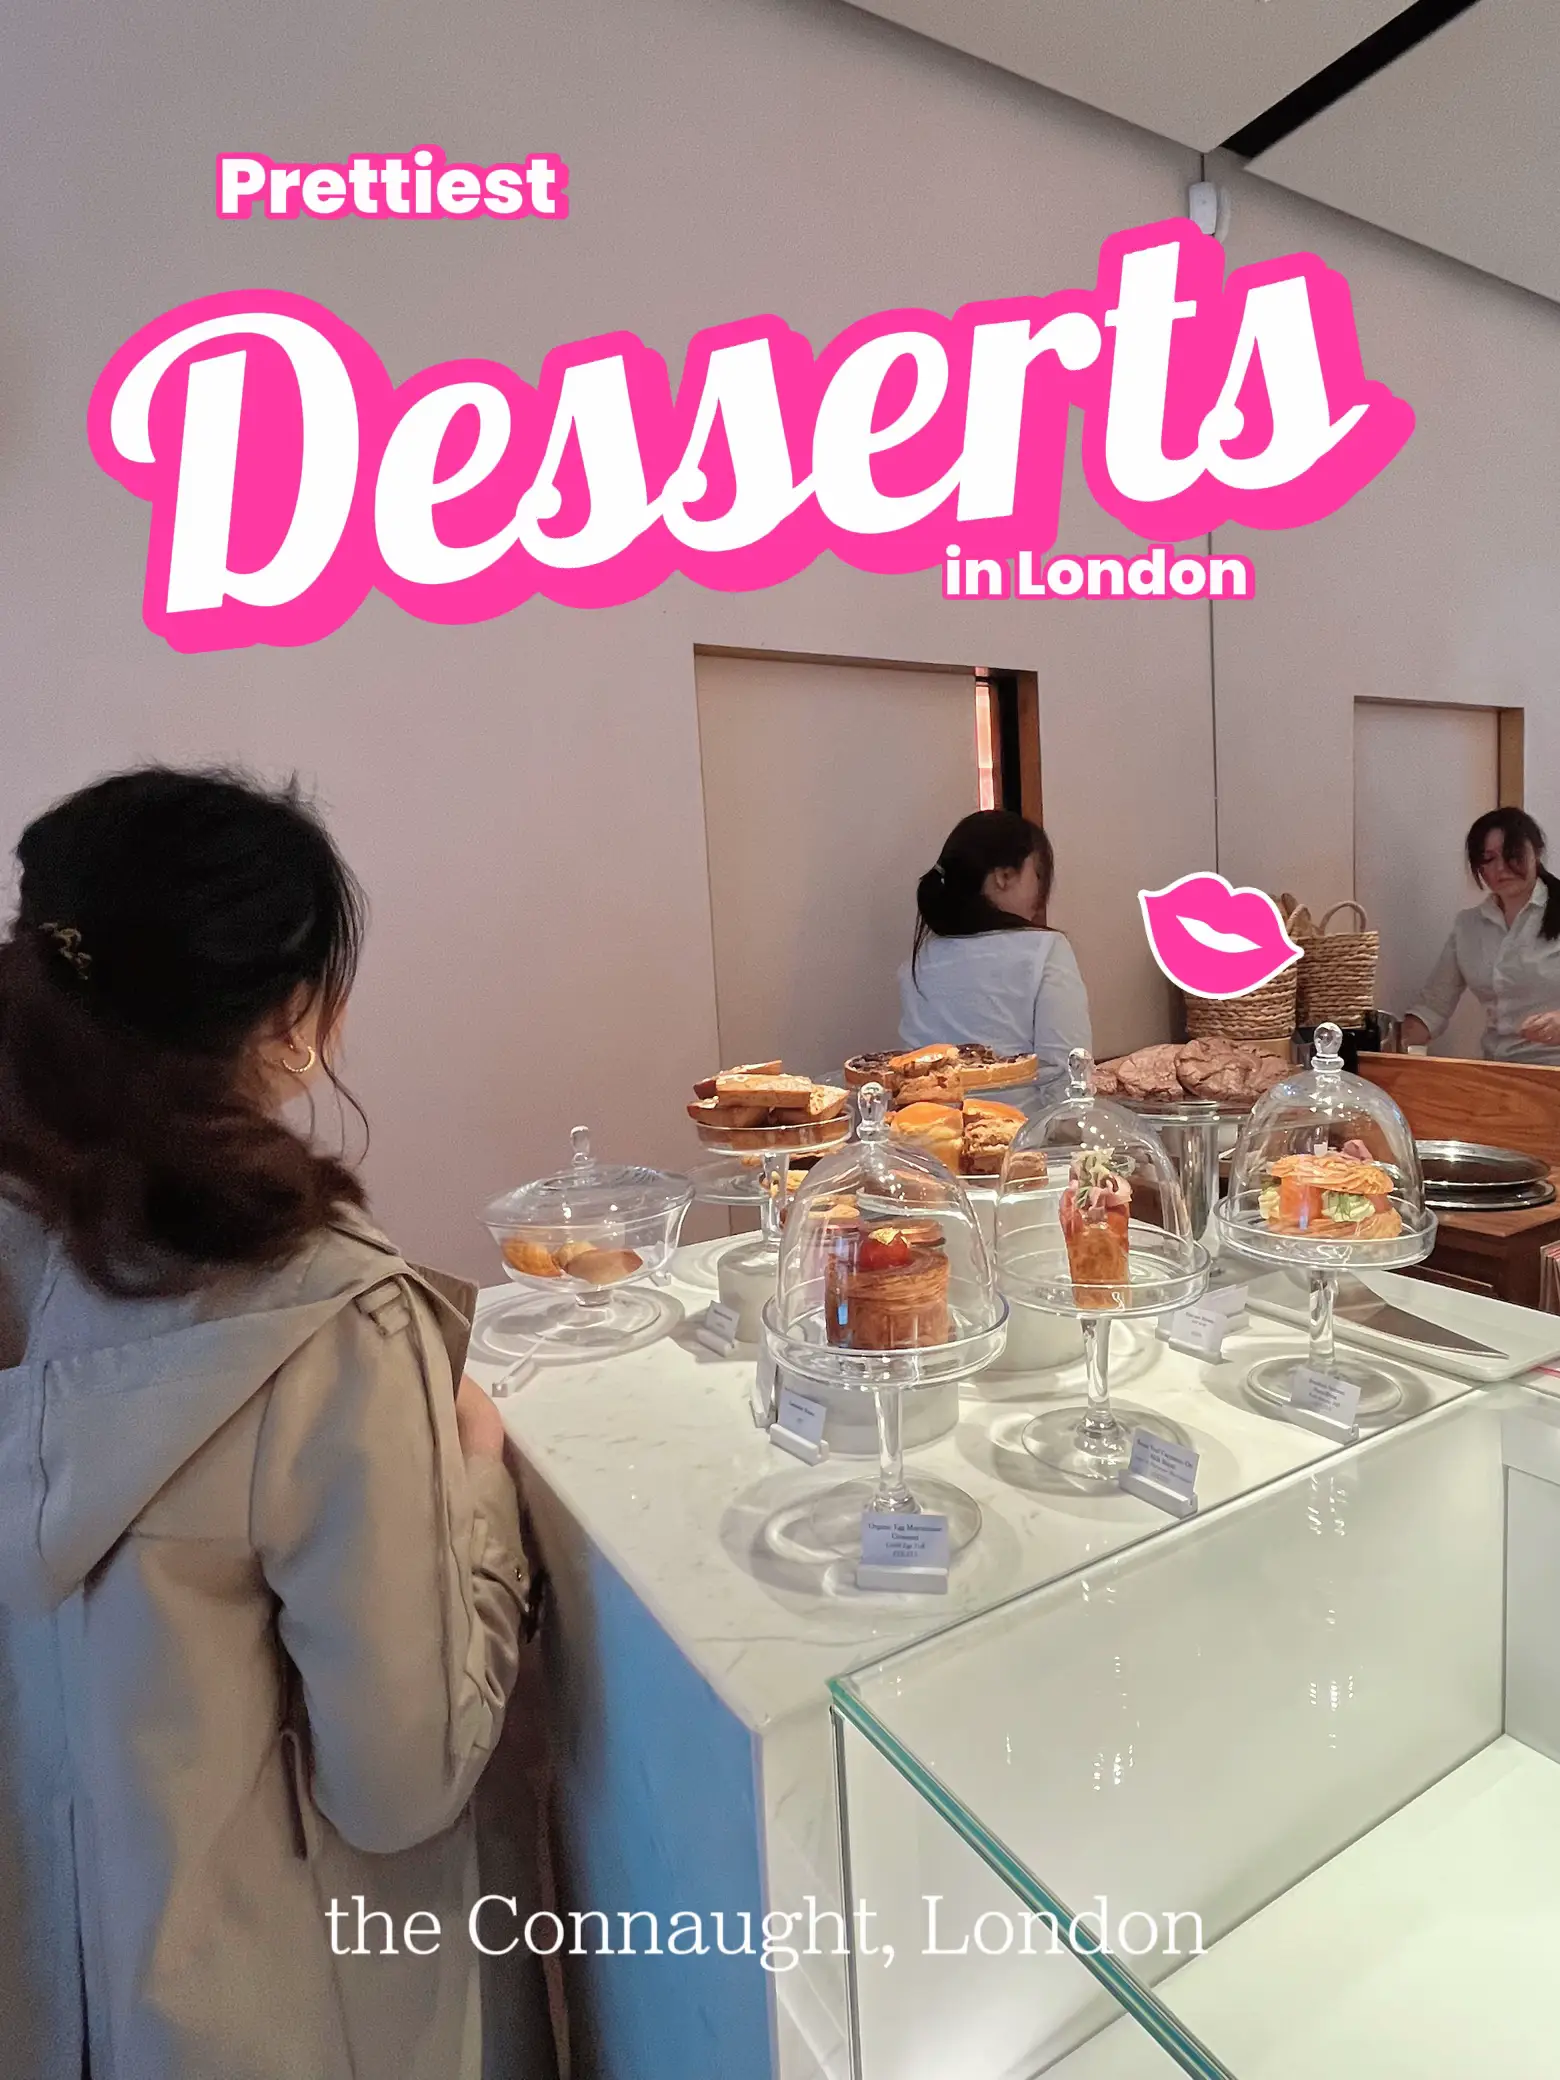 Heavenly Desserts: Inside look at new Instagrammable artisan